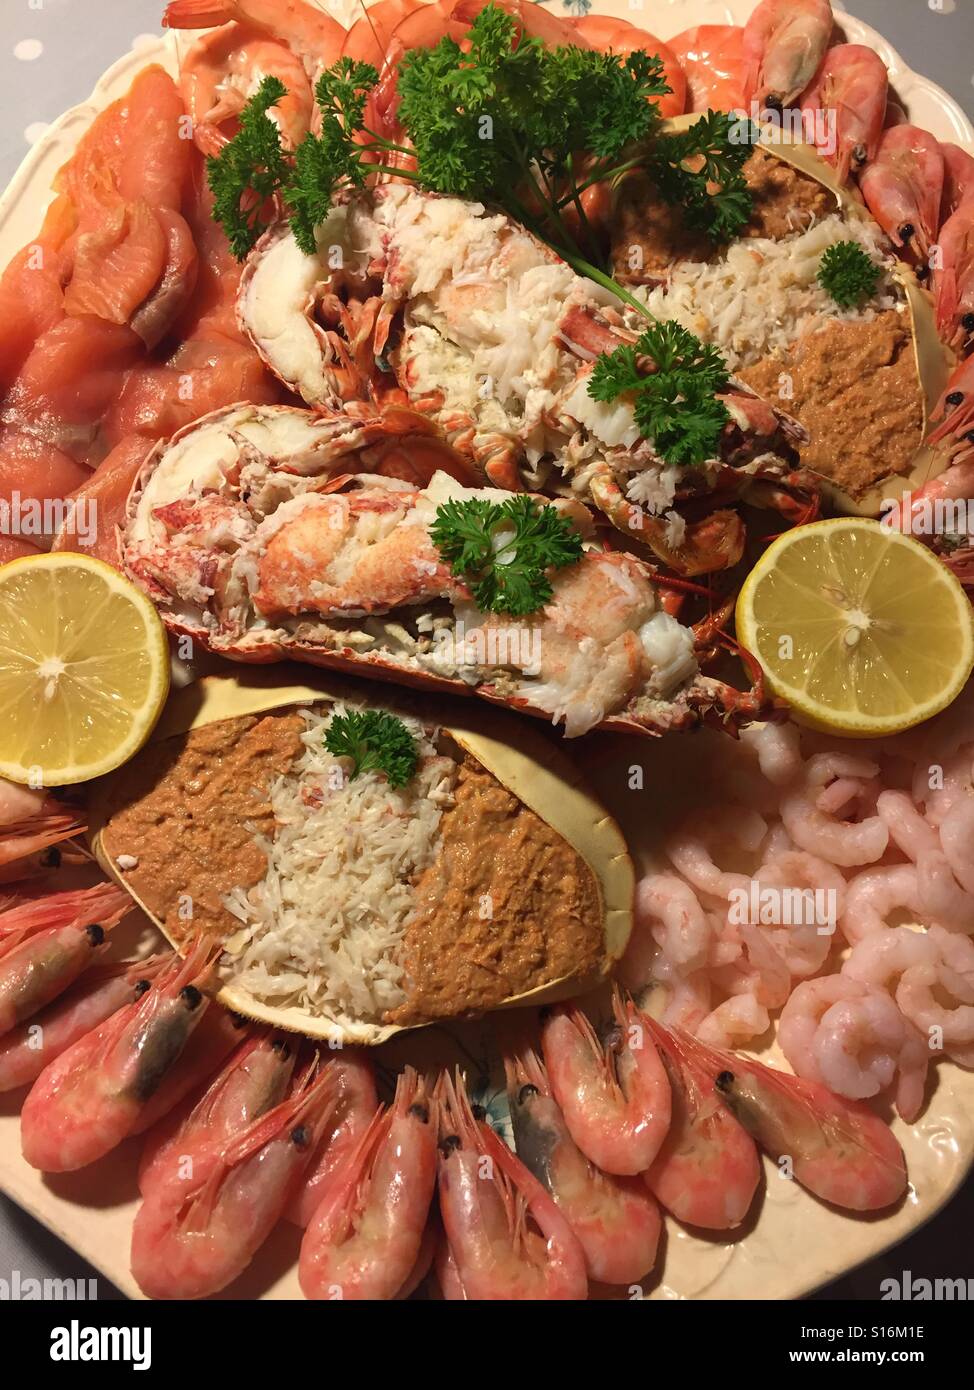 Luxury seafood platter. Dressed crab and lobster with smoked salmon and prawns of various types Stock Photo